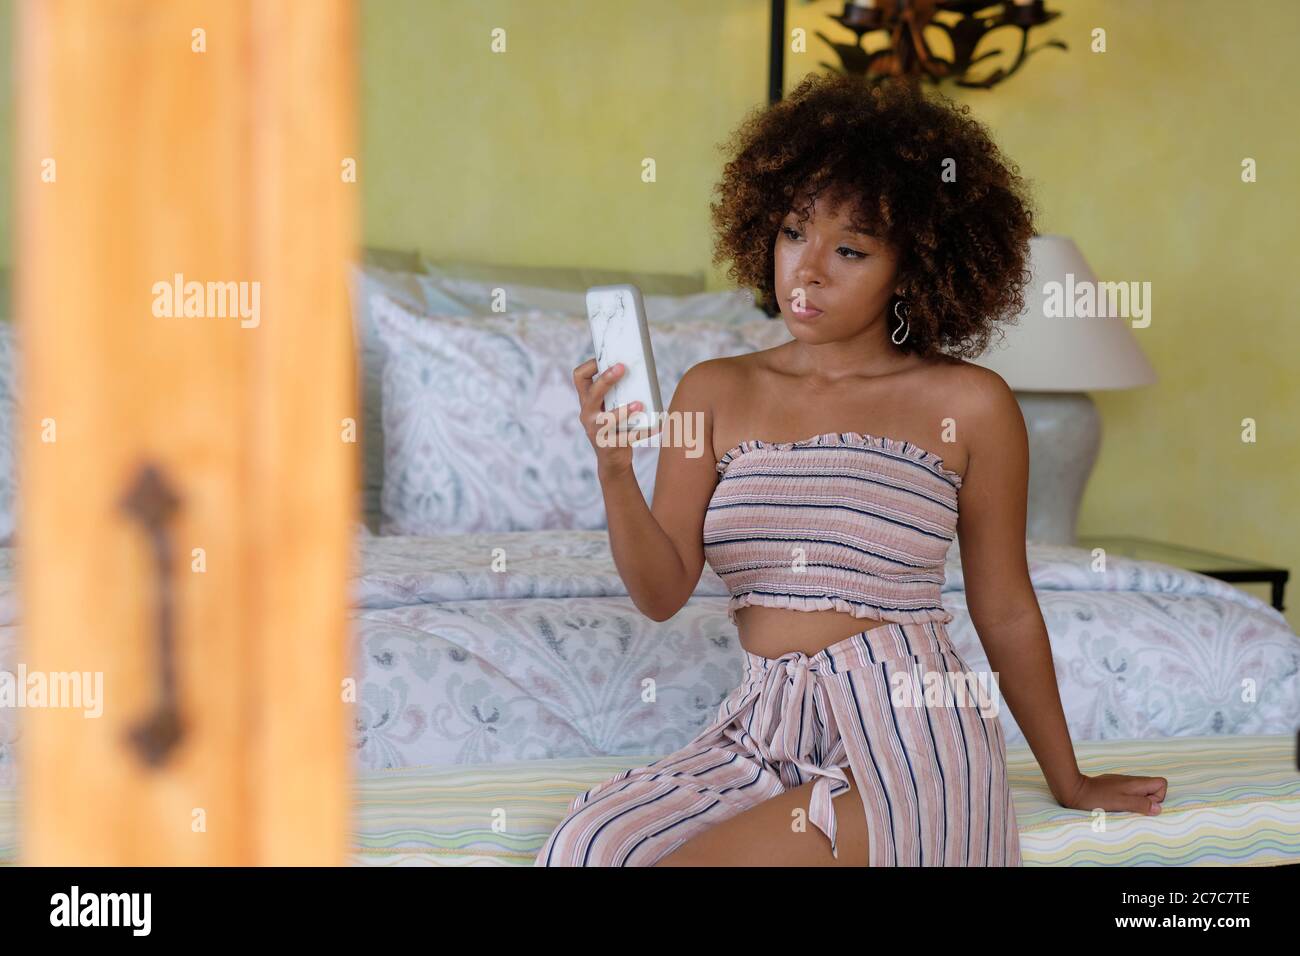 Young woman with afro look hair checking her phone or taking a selfie in a bedroom Stock Photo